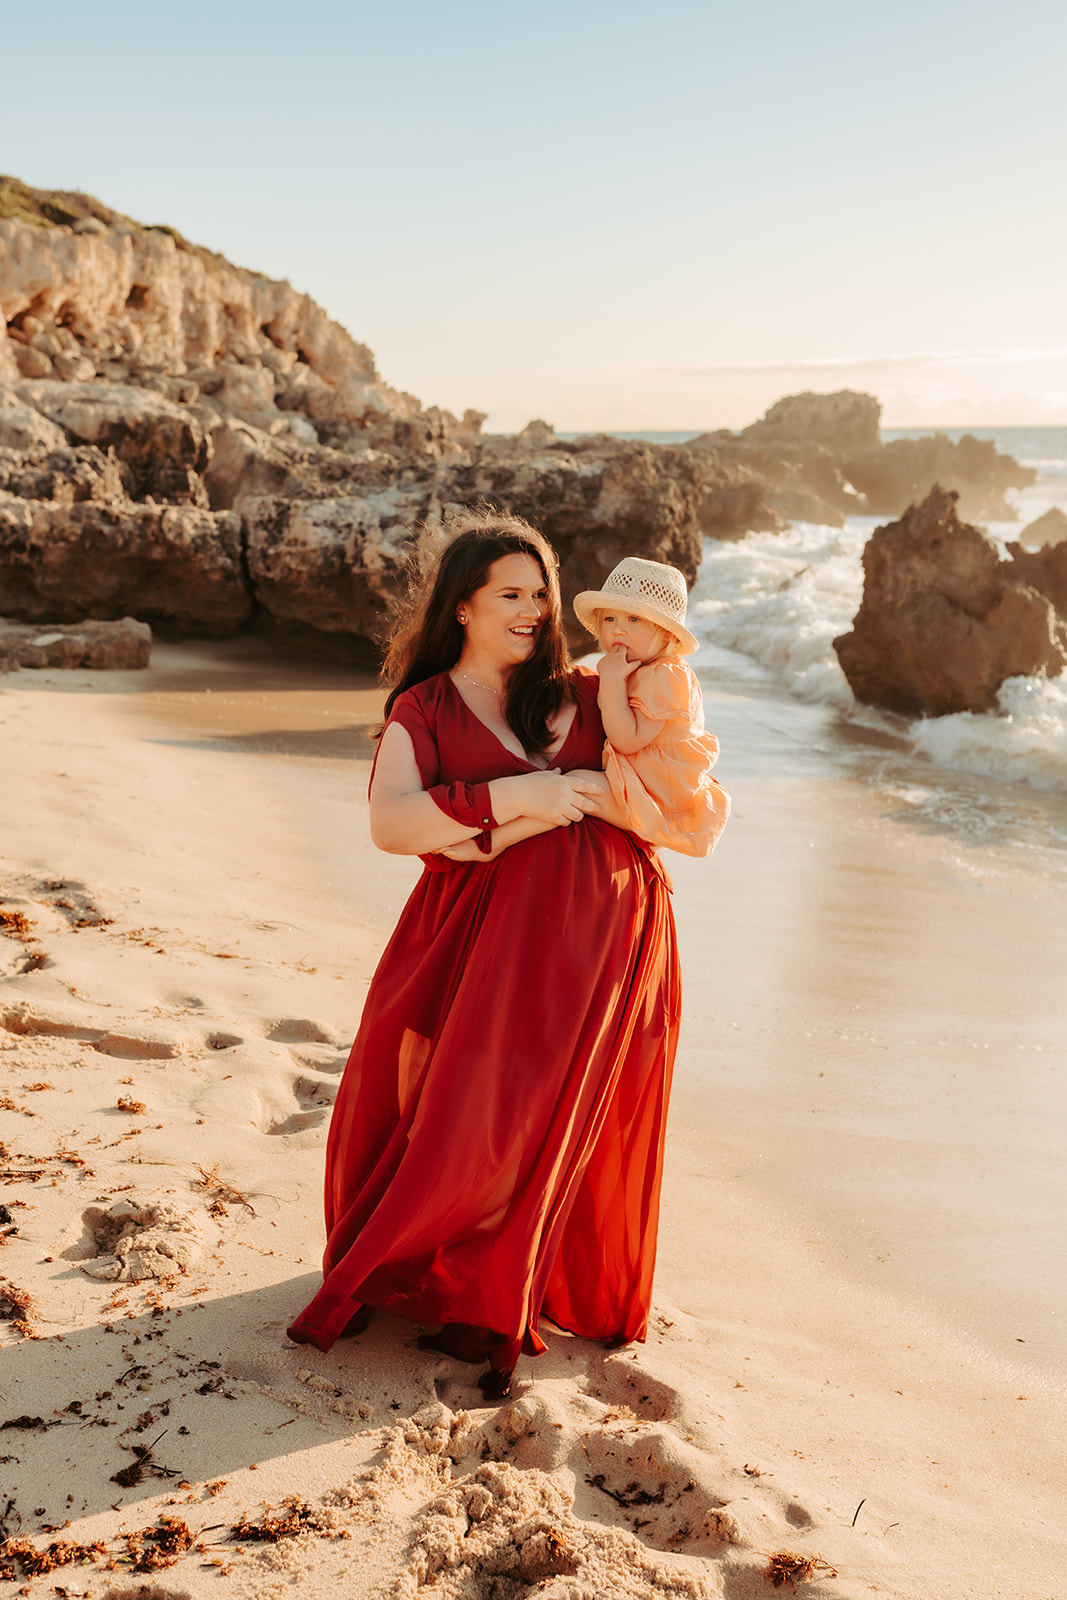 Motherhood and Maternity photographer specializing in relaxed and unposed photos. Perth's best locations!